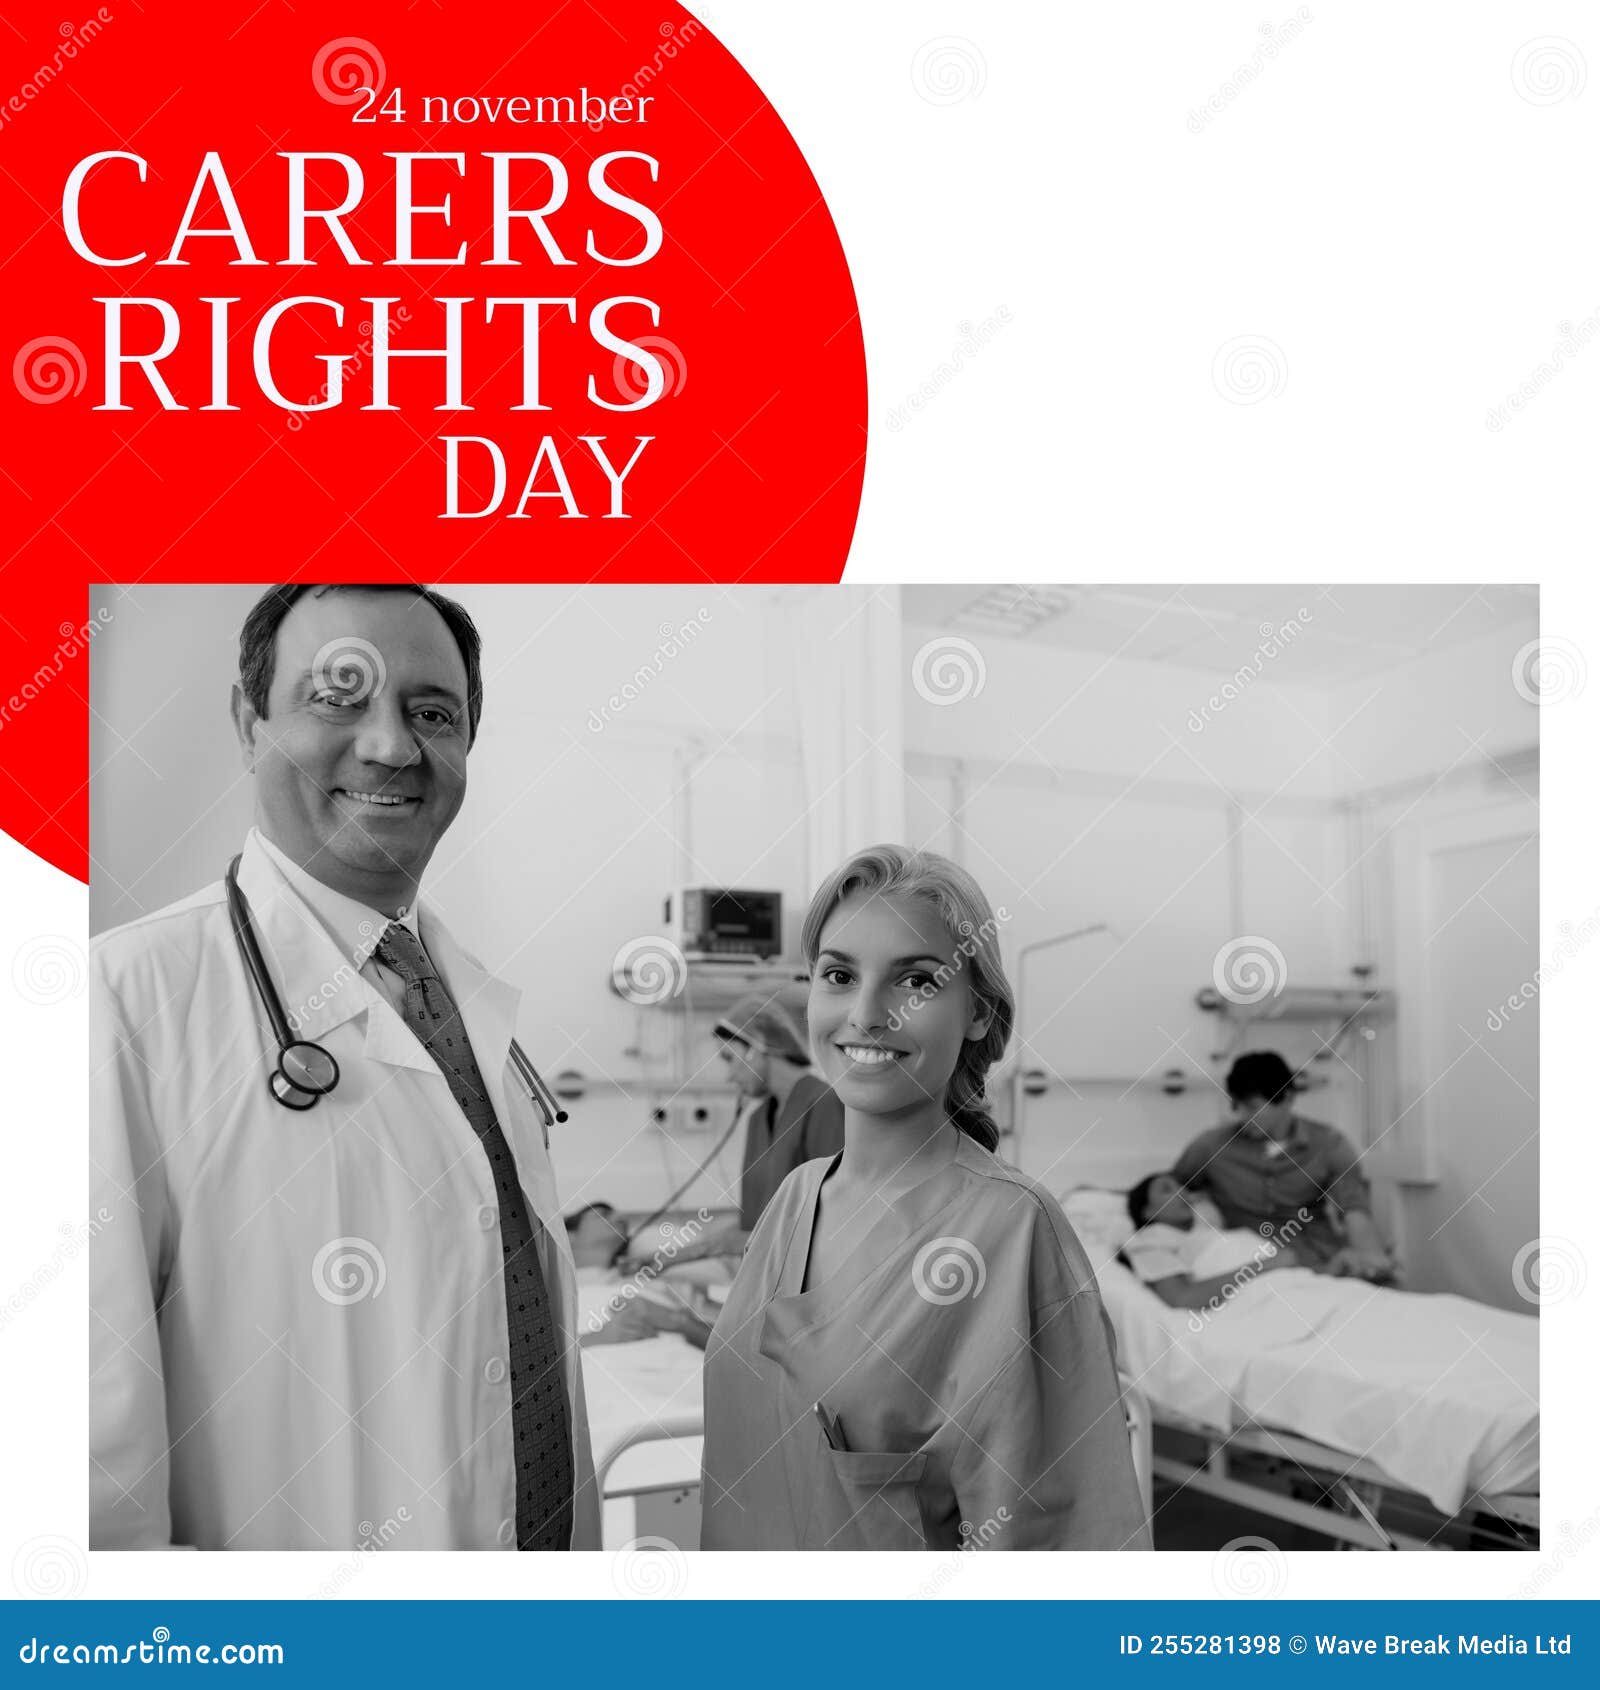 composition of carers rights day text with diverse doctors and patients